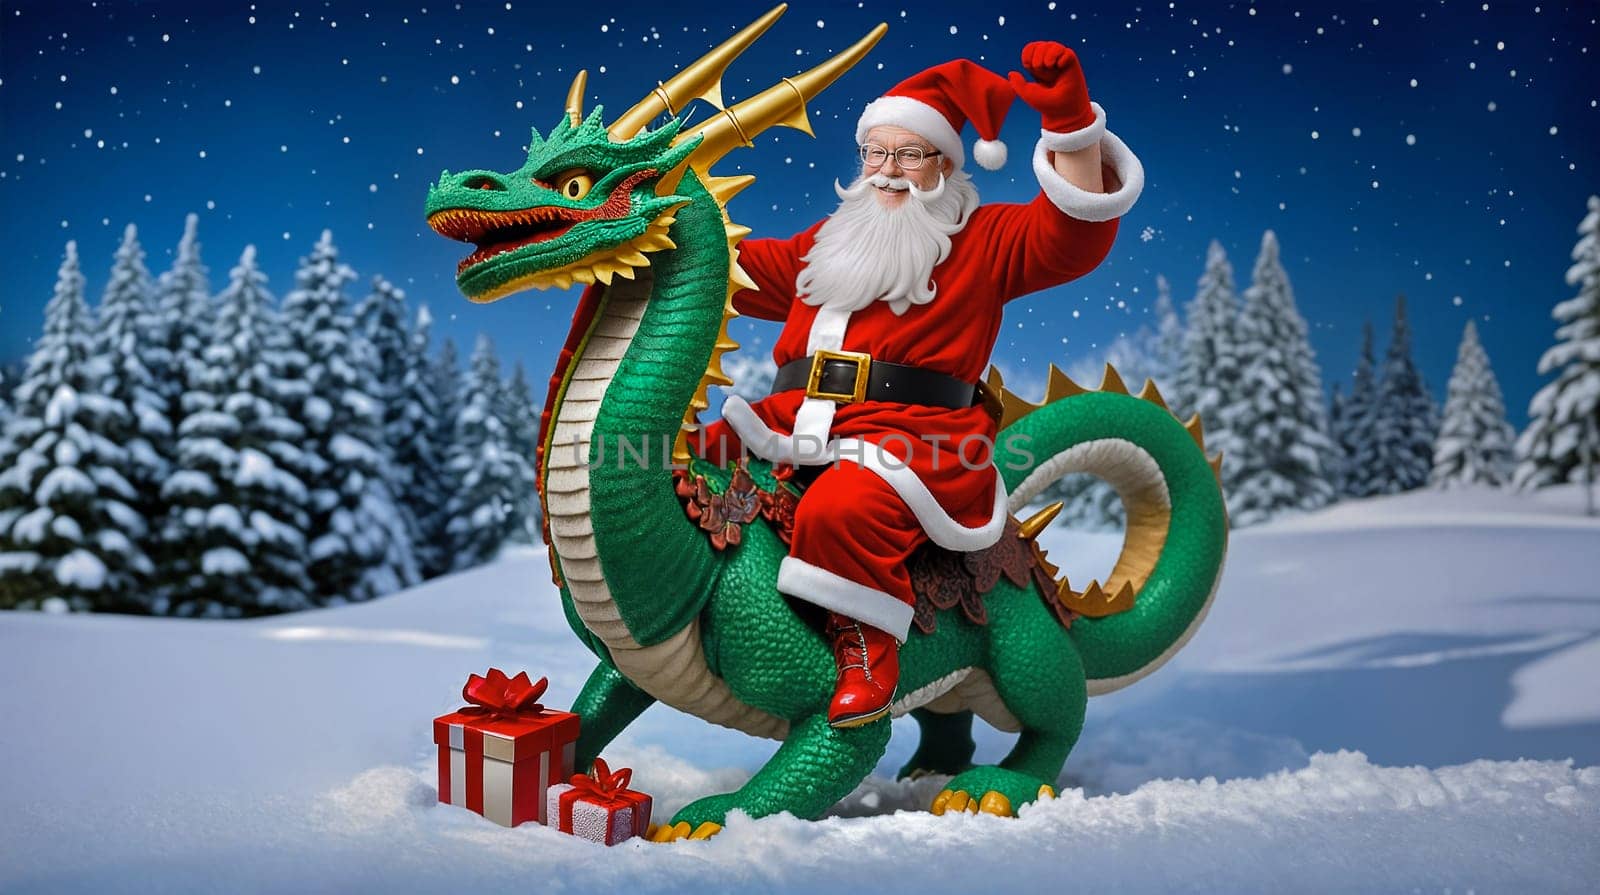 Cheerful Santa Claus sits astride a Green Dragon against a background of snow and fir trees.